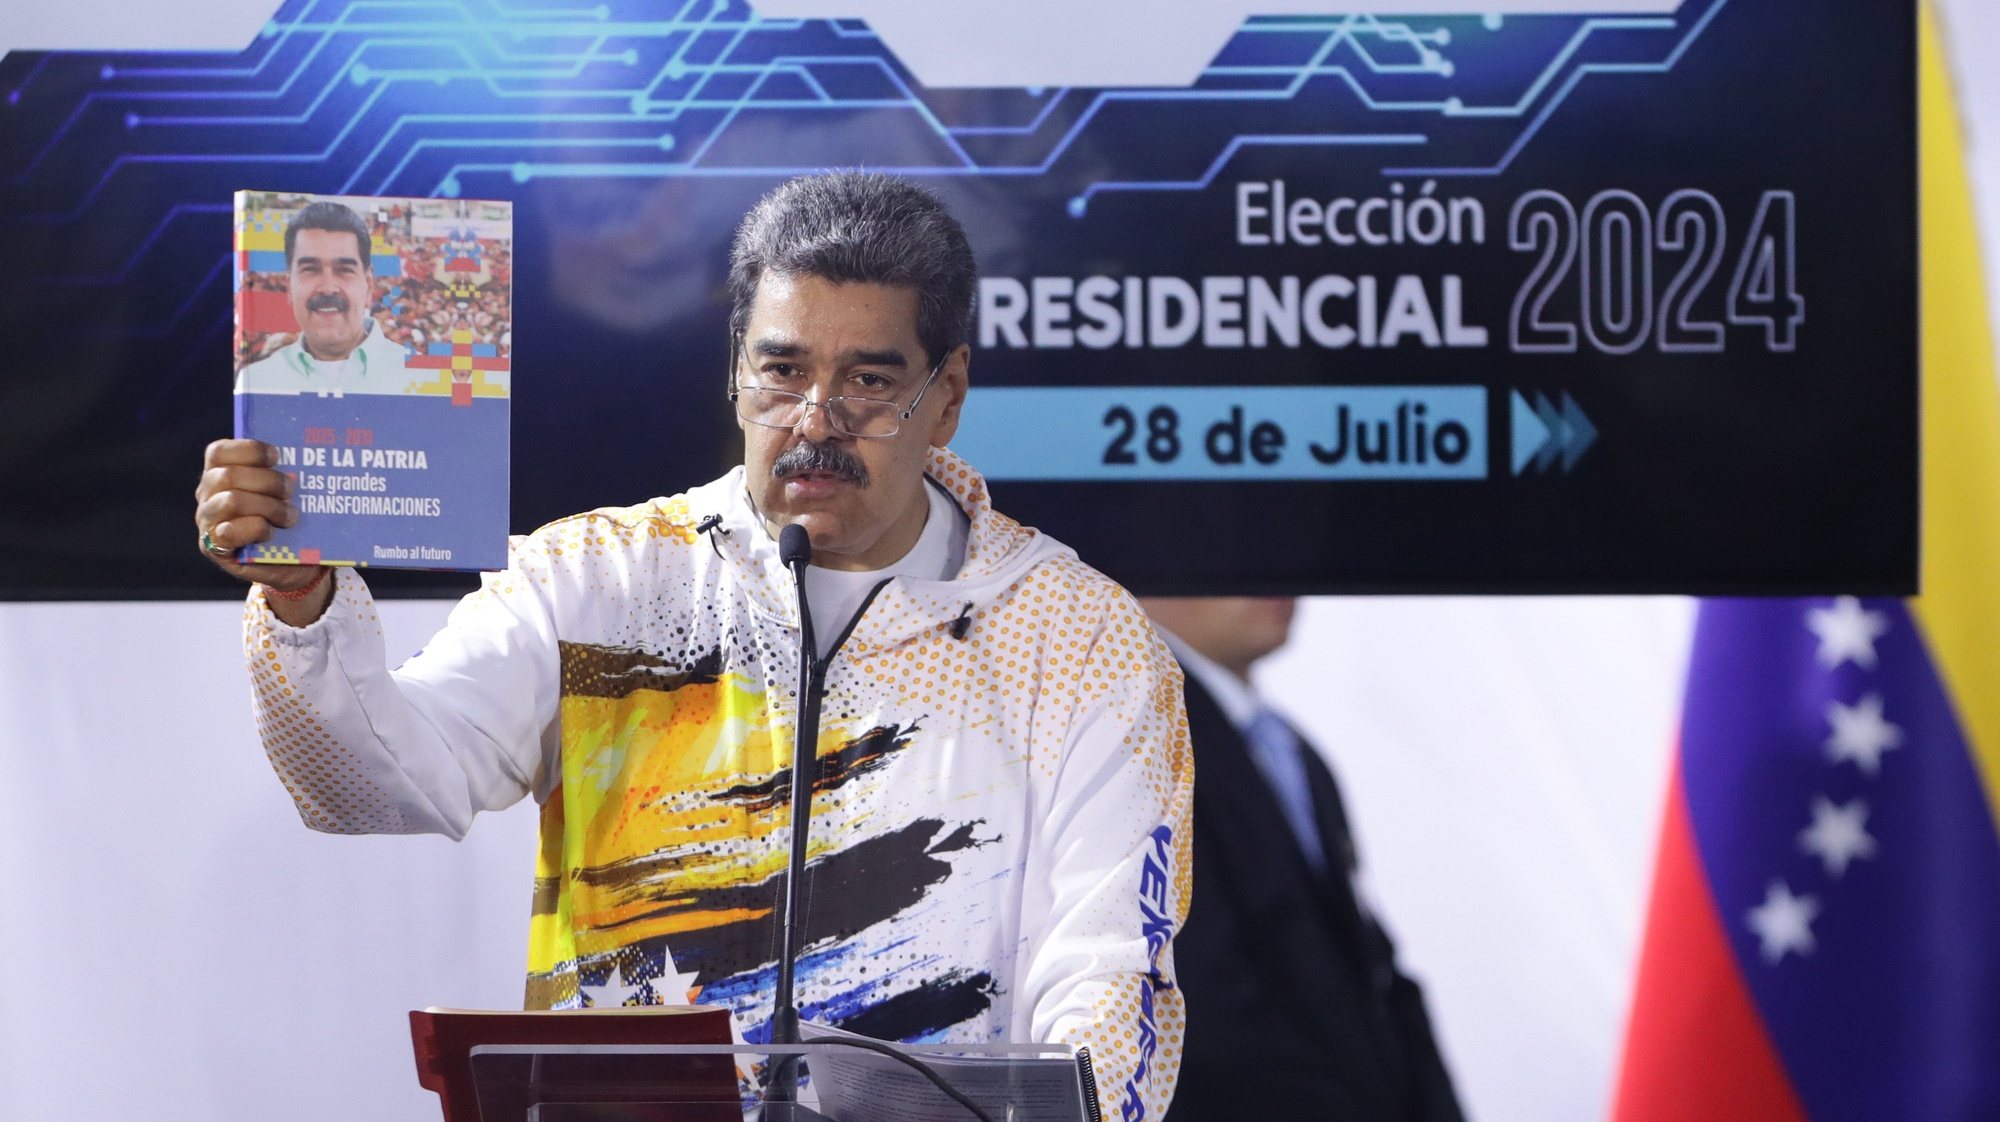 epa11243535 President Nicolas Maduro speaks after making his candidacy official for the presidential elections on July 28, in which he will compete for a third period in power, at the headquarters of the National Electoral Council (CNE) in Caracas, Venezuela, 25 March 2024. The Chavista leader went to the headquarters of the electoral body after participating in a march called by the ruling United Socialist Party of Venezuela (PSUV) in support of his registration, with which he becomes the tenth politician to make his aspiration official, a few hours before the deadline established in the schedule for the presentation of candidatures.  EPA/Rayner Pena R.